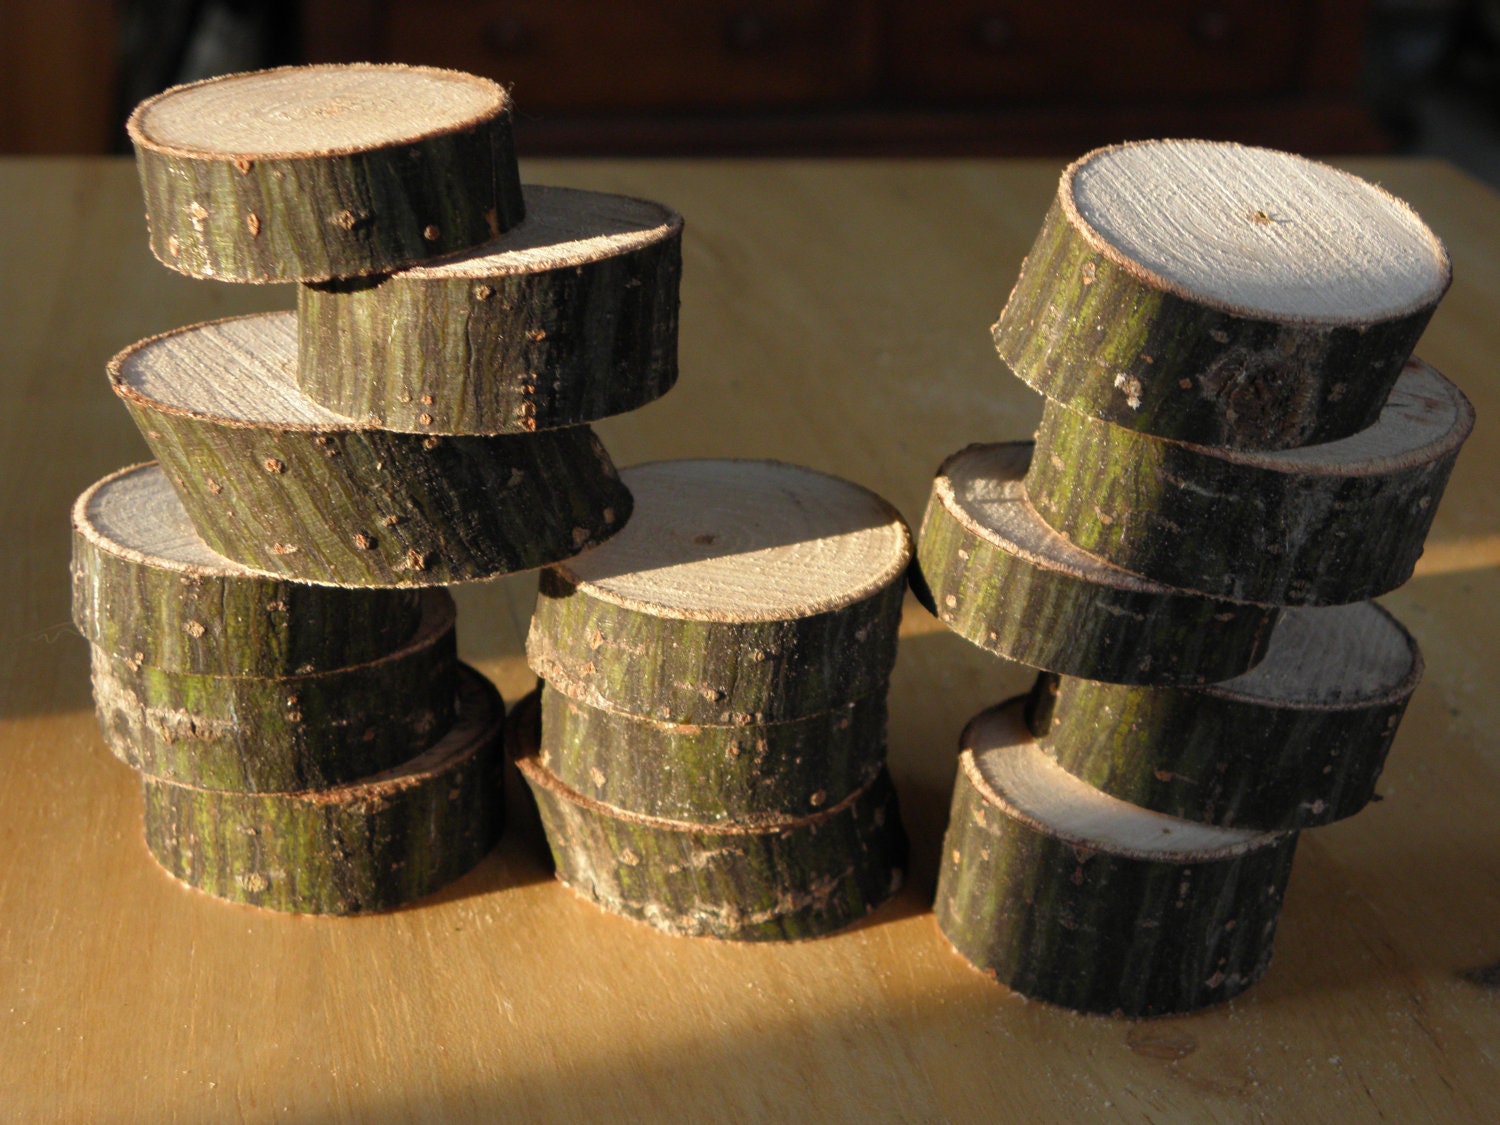 MAPLE WOOD SLICES 1 1/2" Diameter by .5" - .75" Thick, Rustic Woodland Nature Forest Craft Supply - TheRusticWoodshed